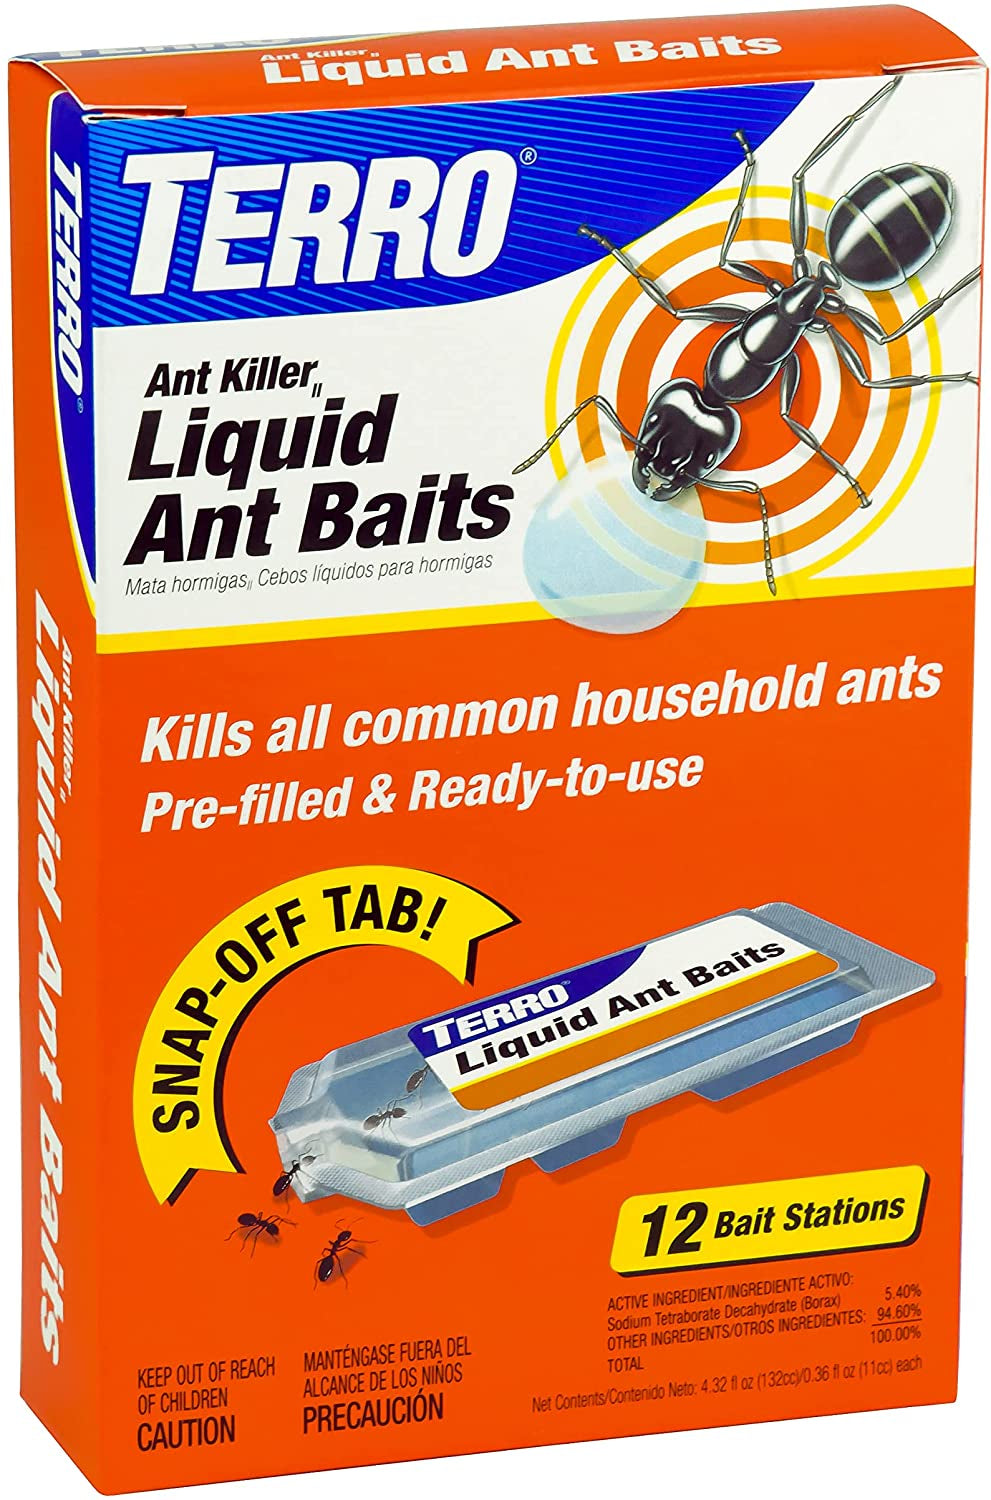 TERRO T300B Liquid Ant Bait Stations, 12-Count: Easy, Fast, and Effective Ant Control